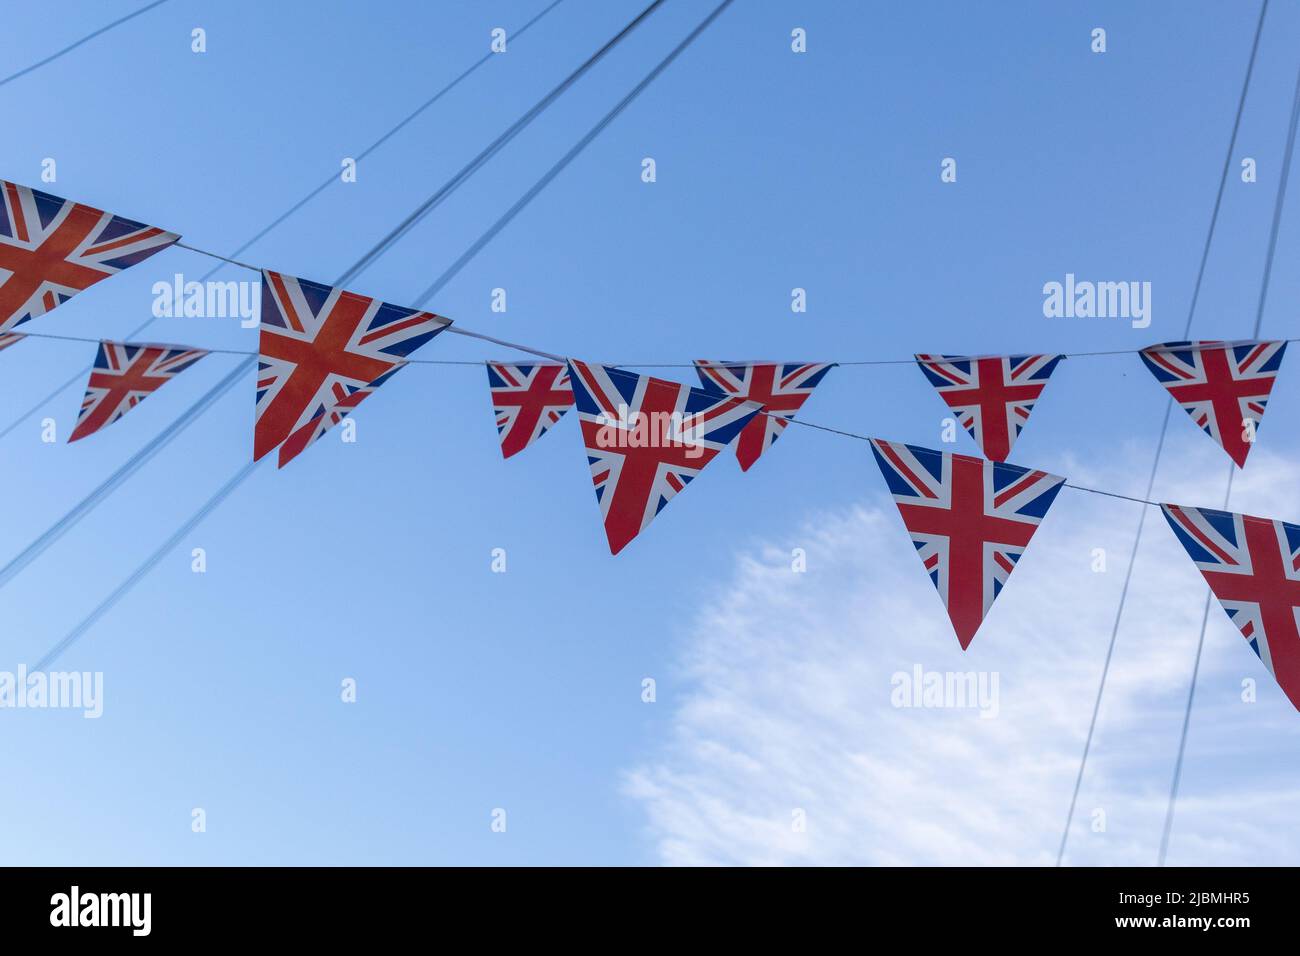 Union Jack bunting, in blue sky with telephone cables. Stock Photo